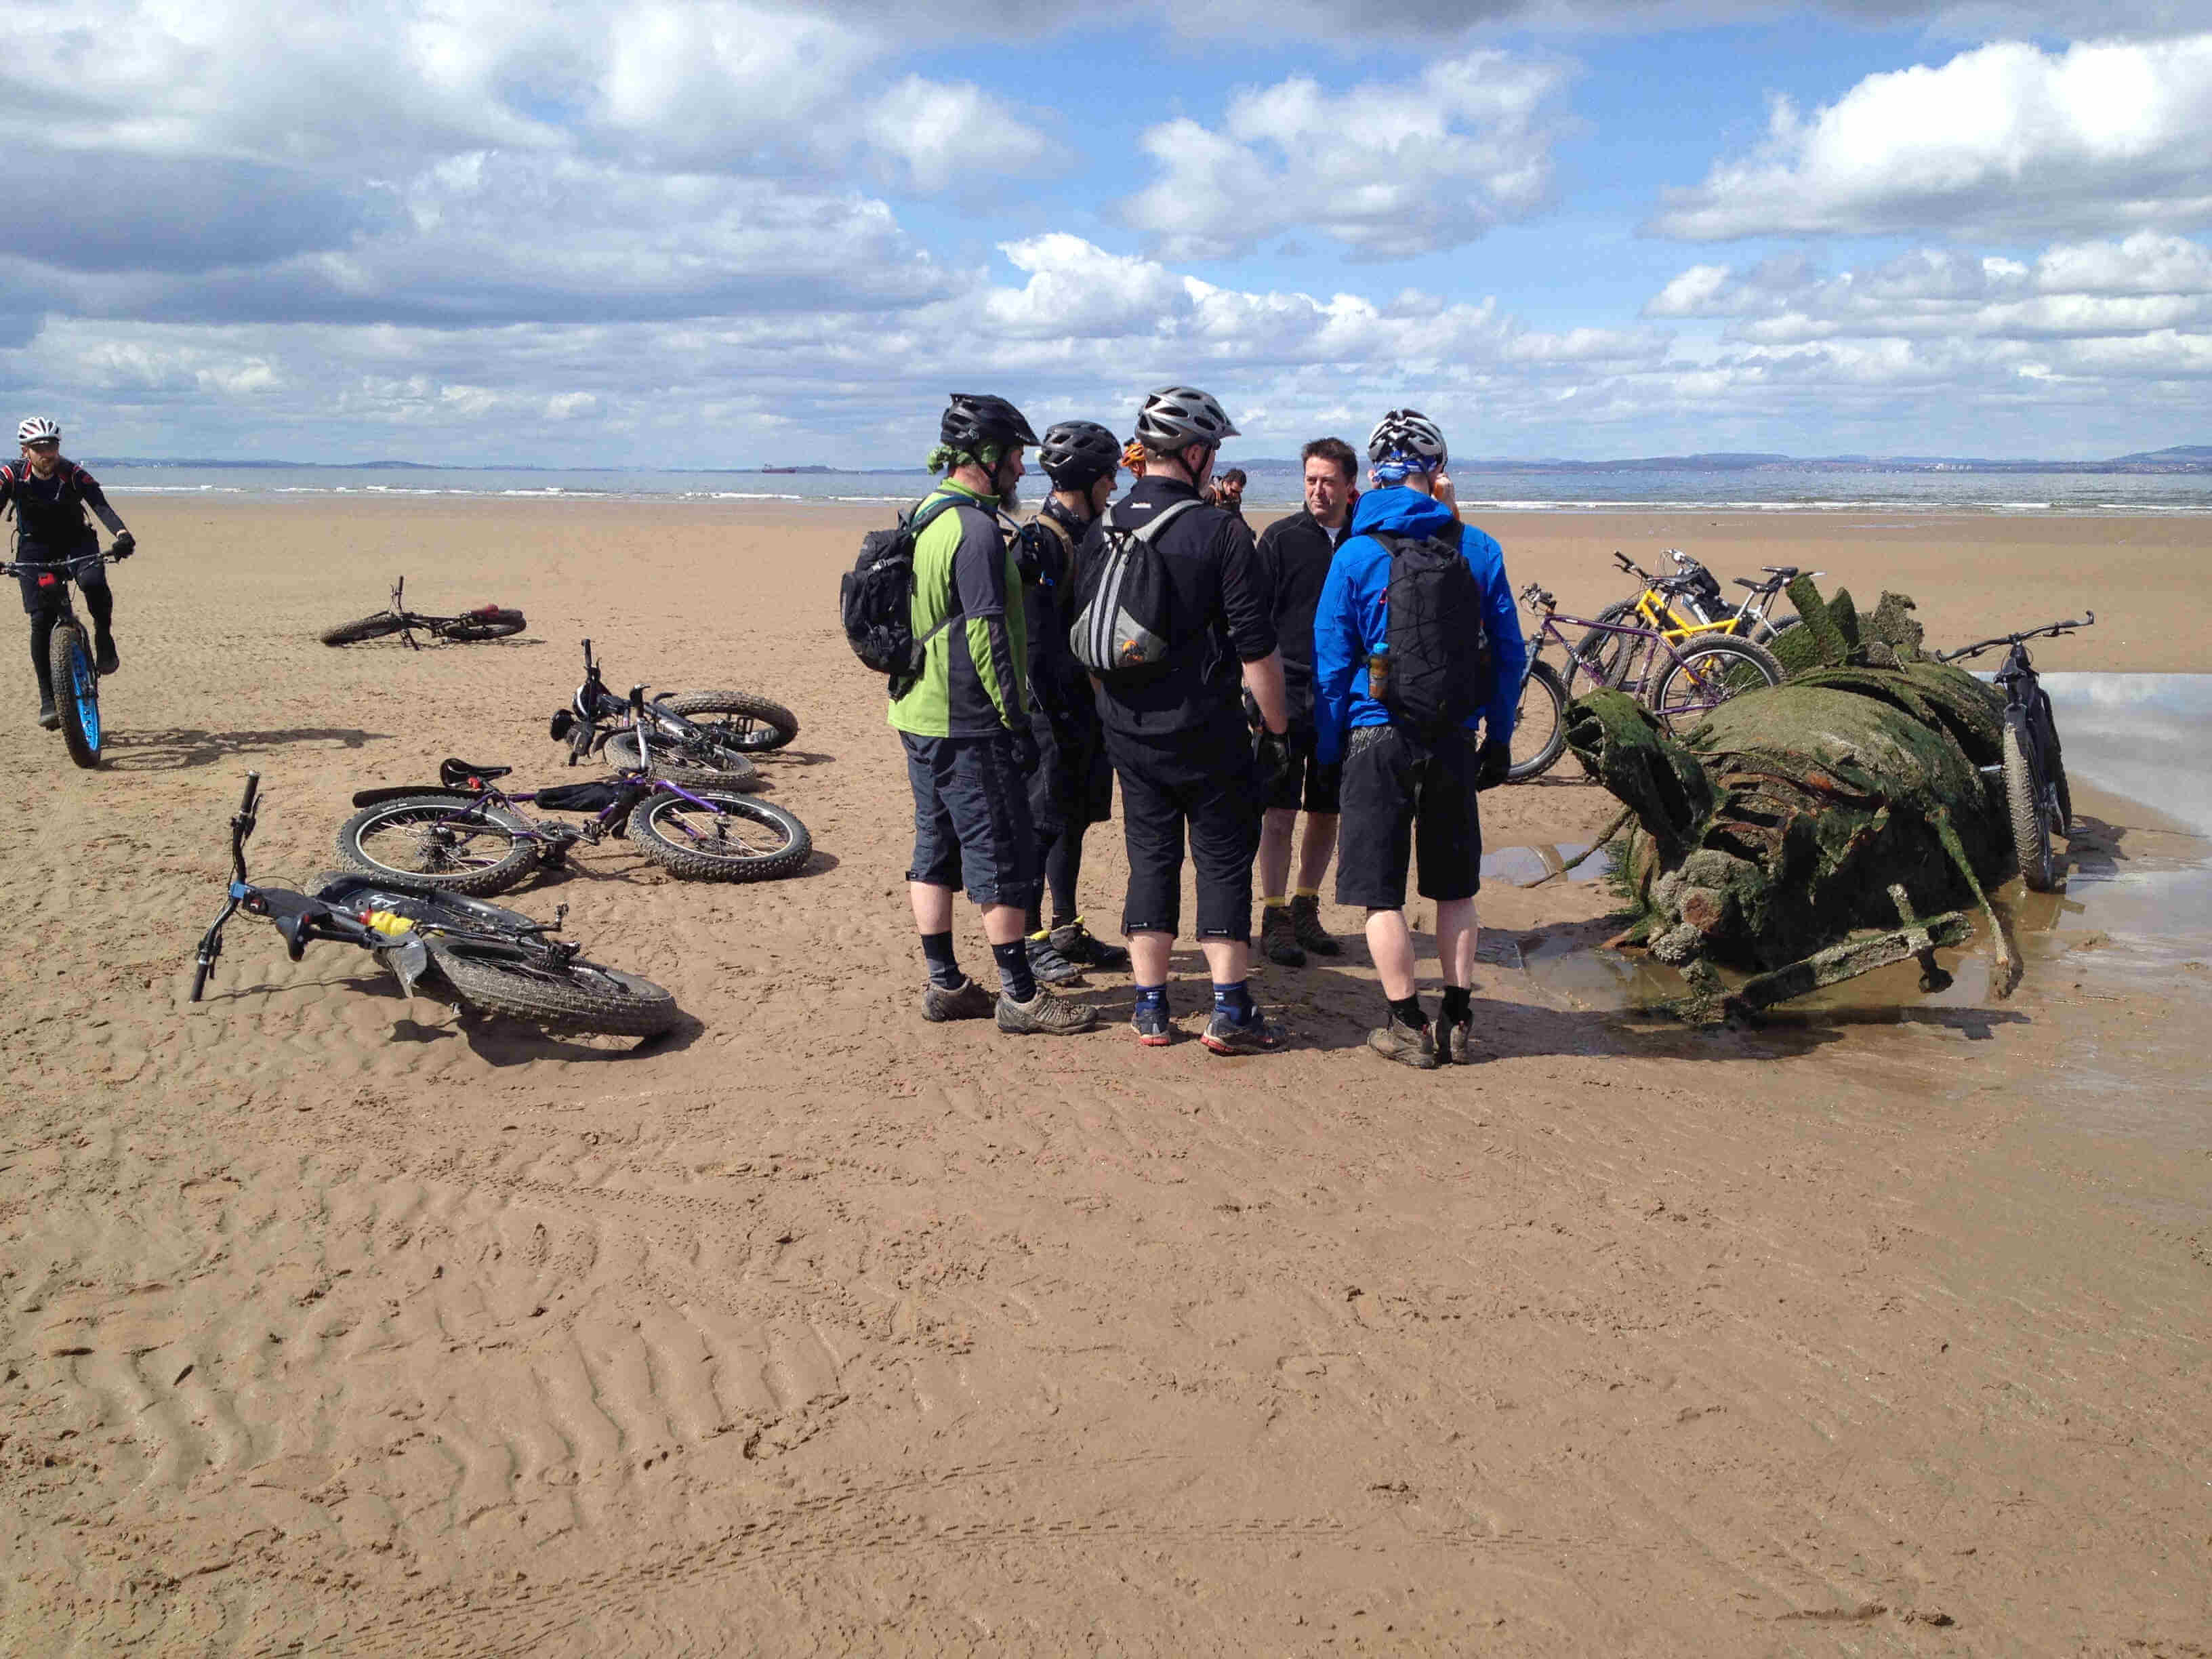 A group of cyclists standing in a circle with their Surly bikes laying around them, on a sandy area next to the ocean